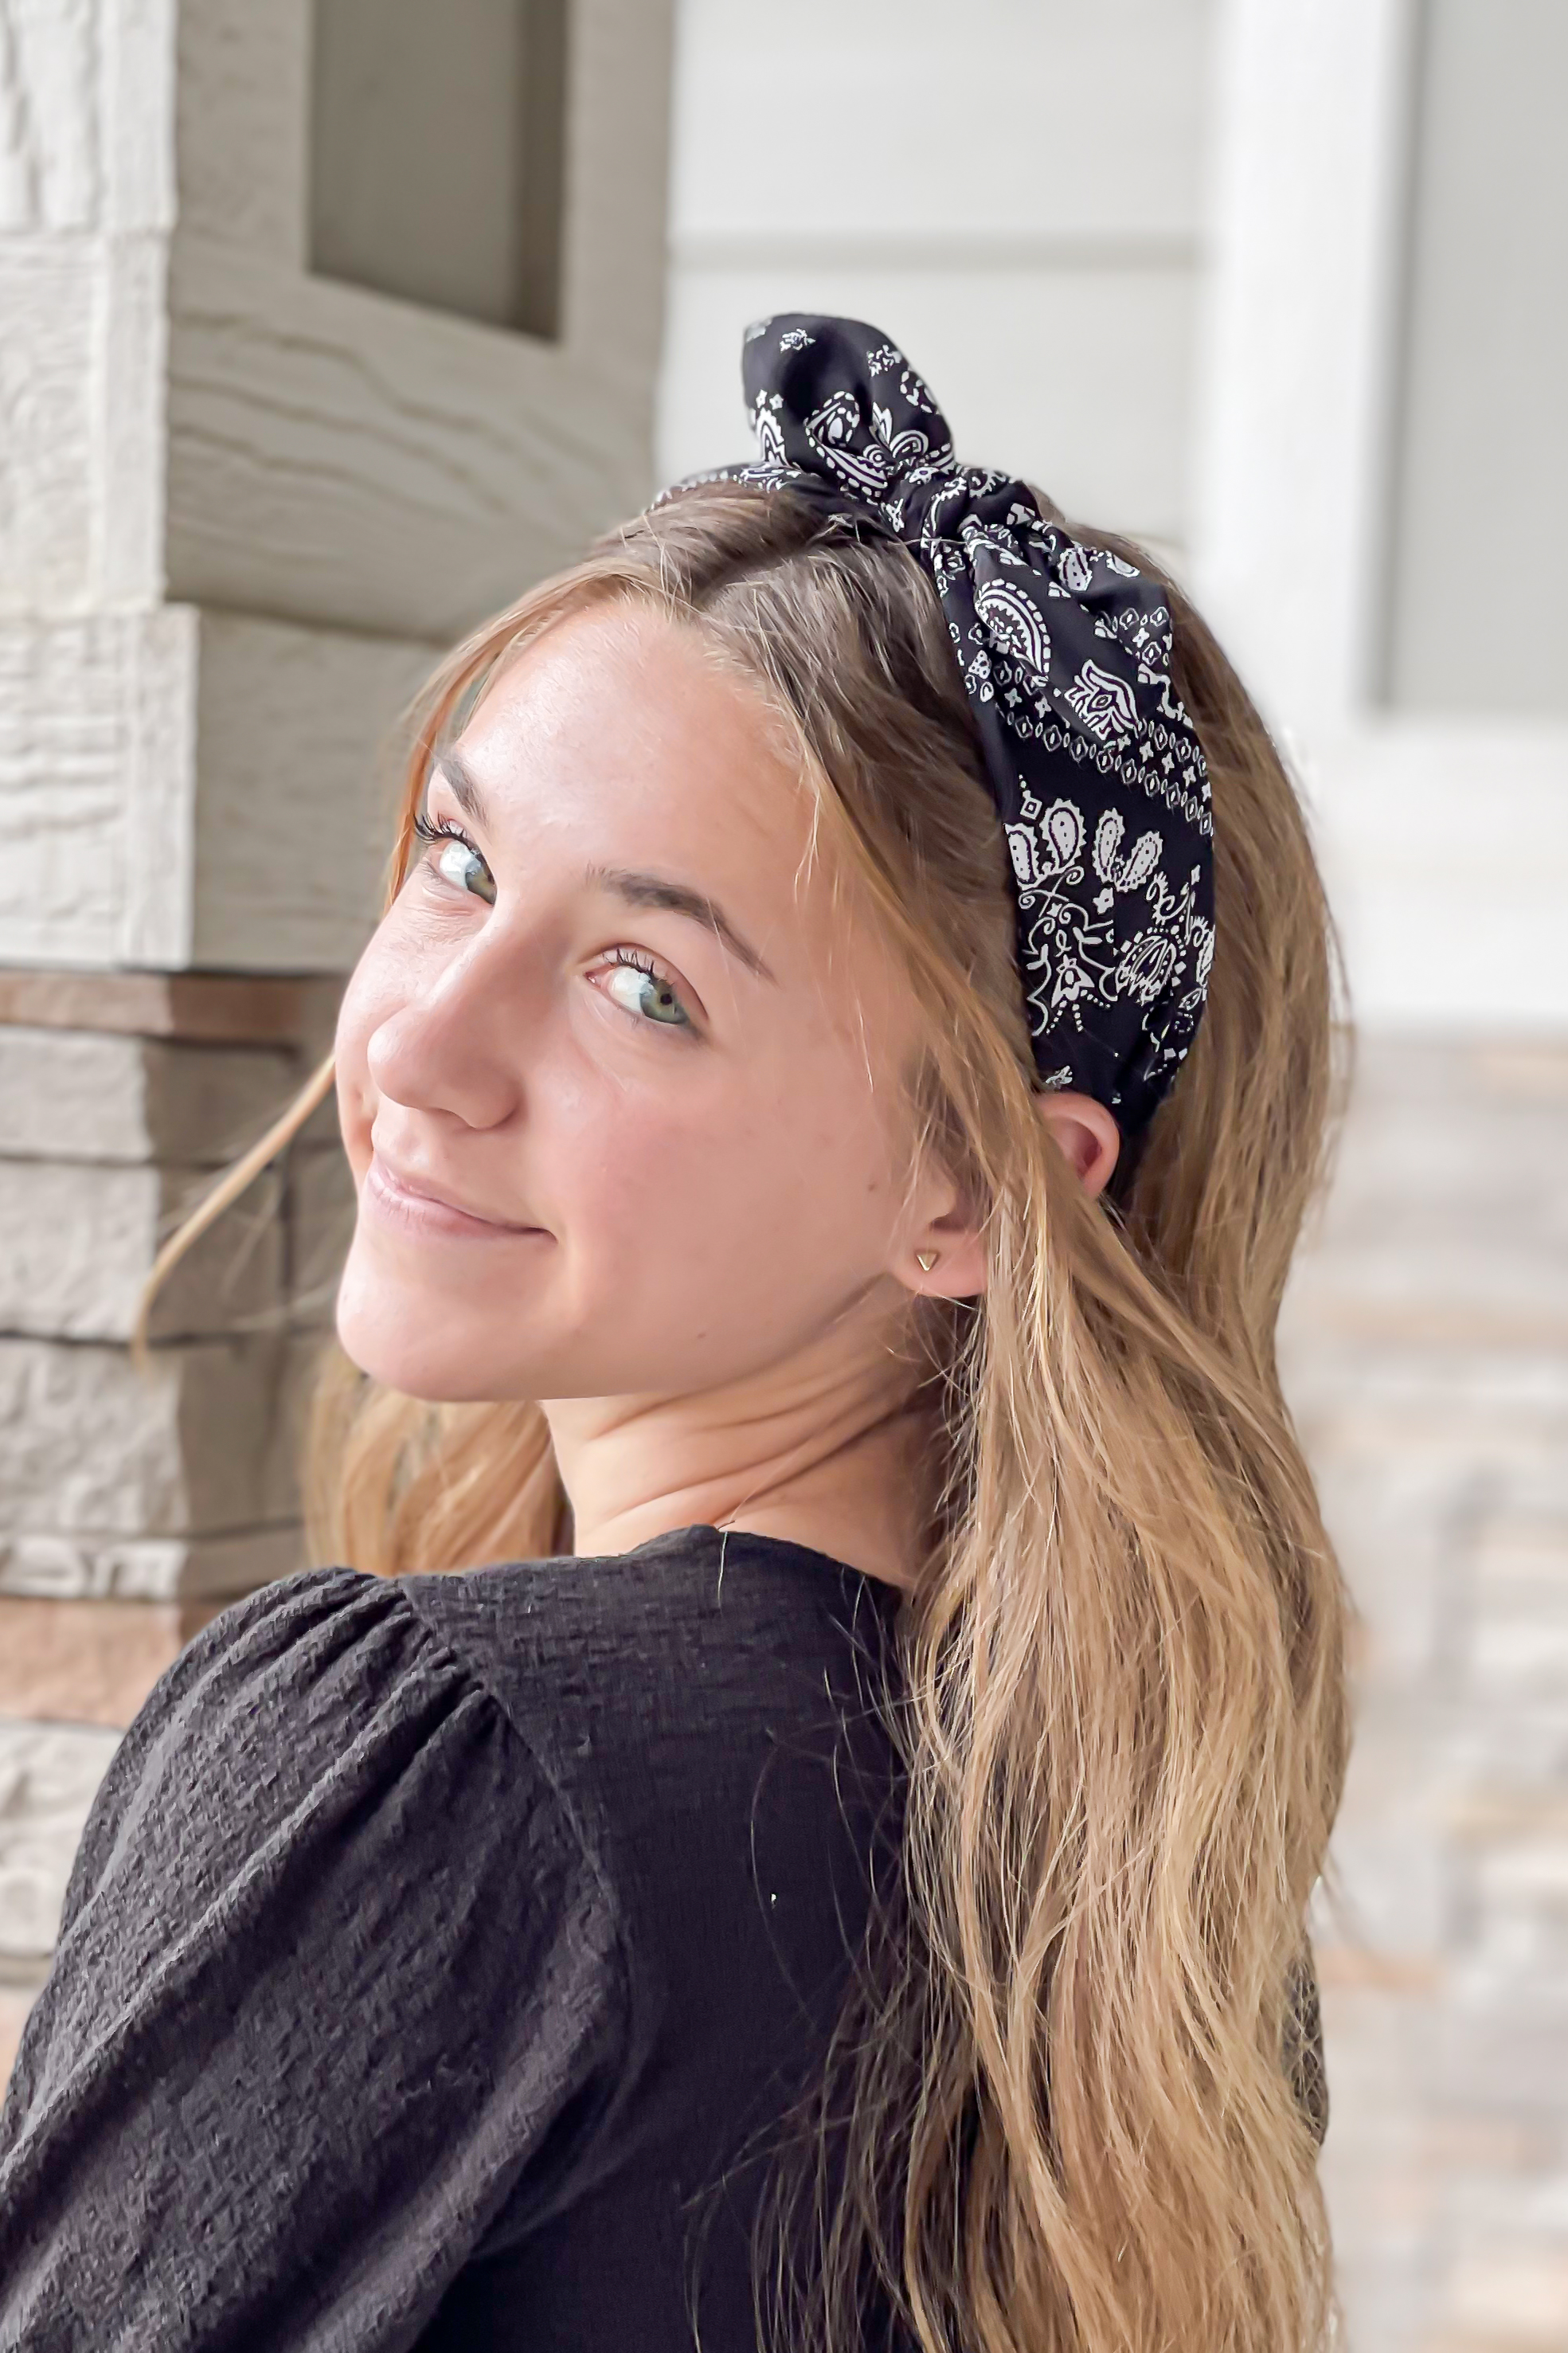 Bandana Headband with Knotted Bow - All Sales Final